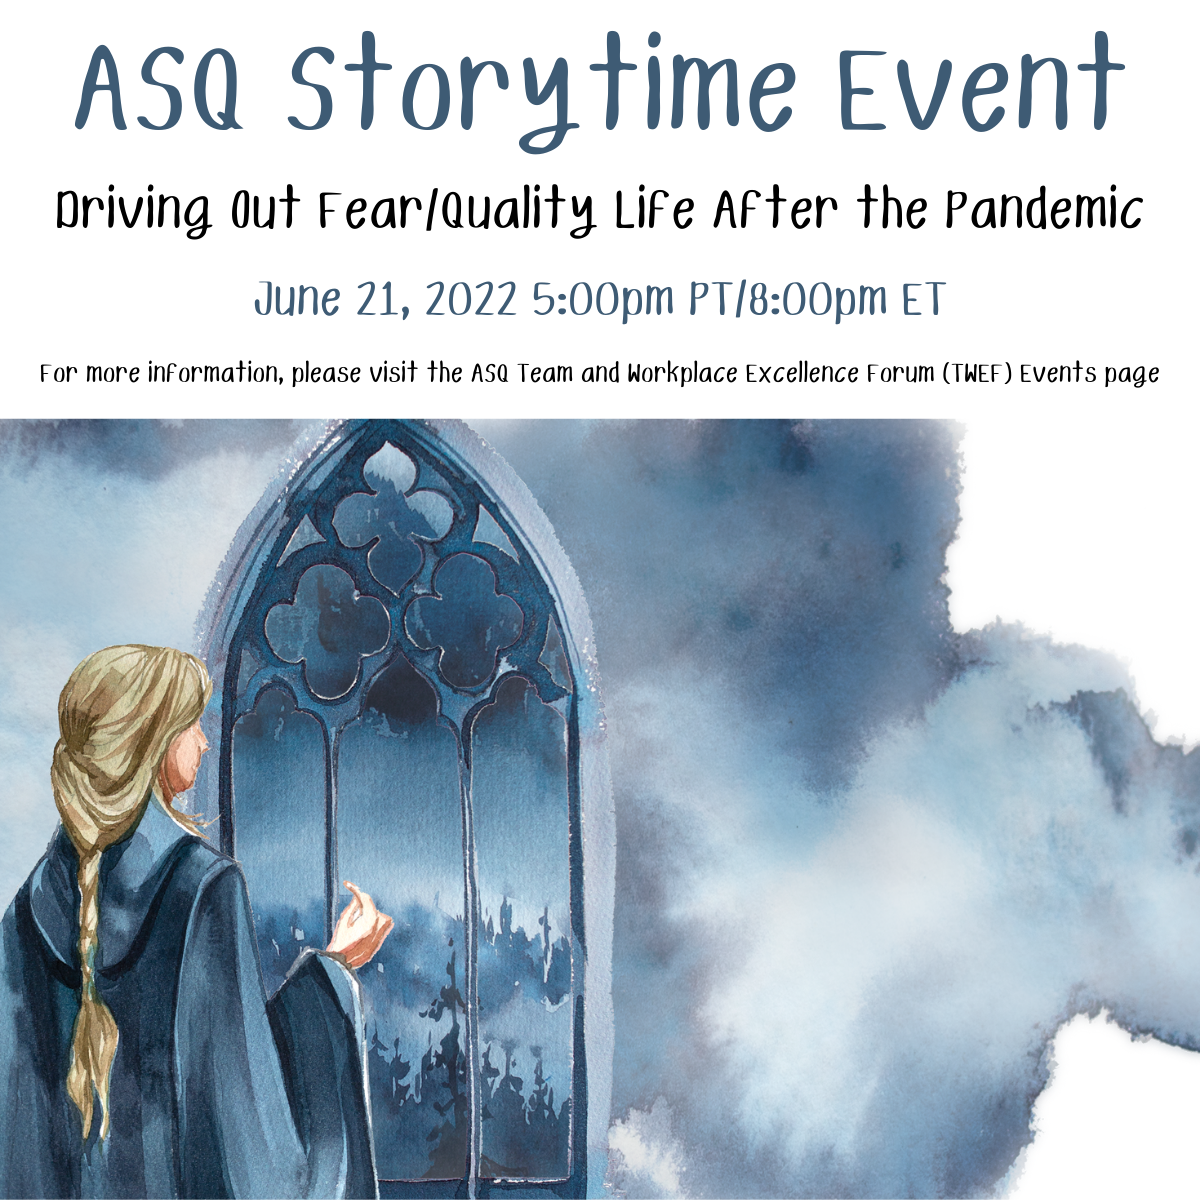 SAVE THE DATE - TWEF Storytime Q2 Event - June 21, 2022 - 5:00pm PT/8:00pm ET 3089